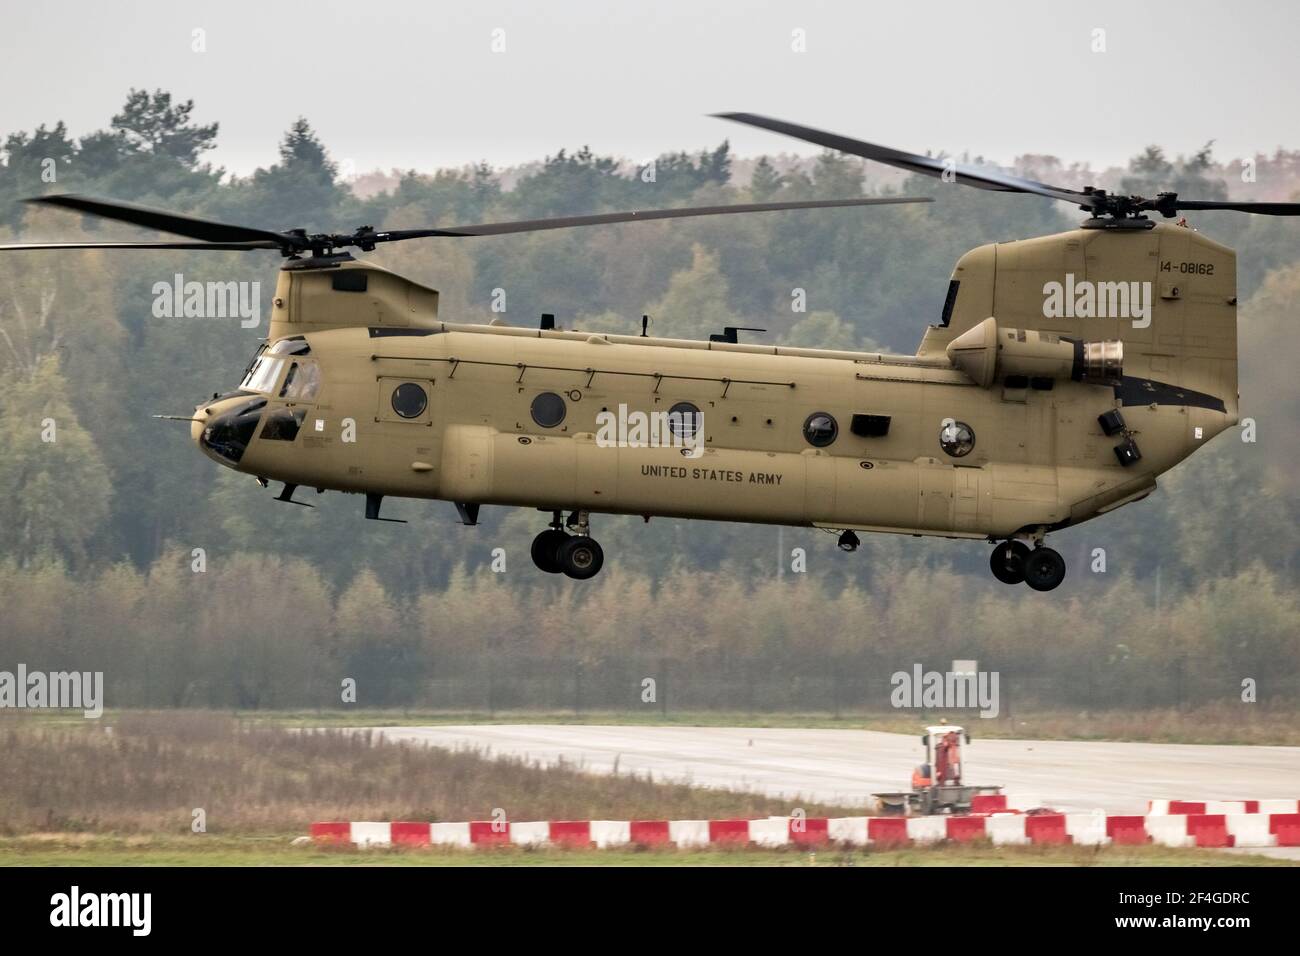 US Army Boeing CH-47F Chinook transport helicopter landing at an airport in The Netherlands - July 2, 2020 Stock Photo